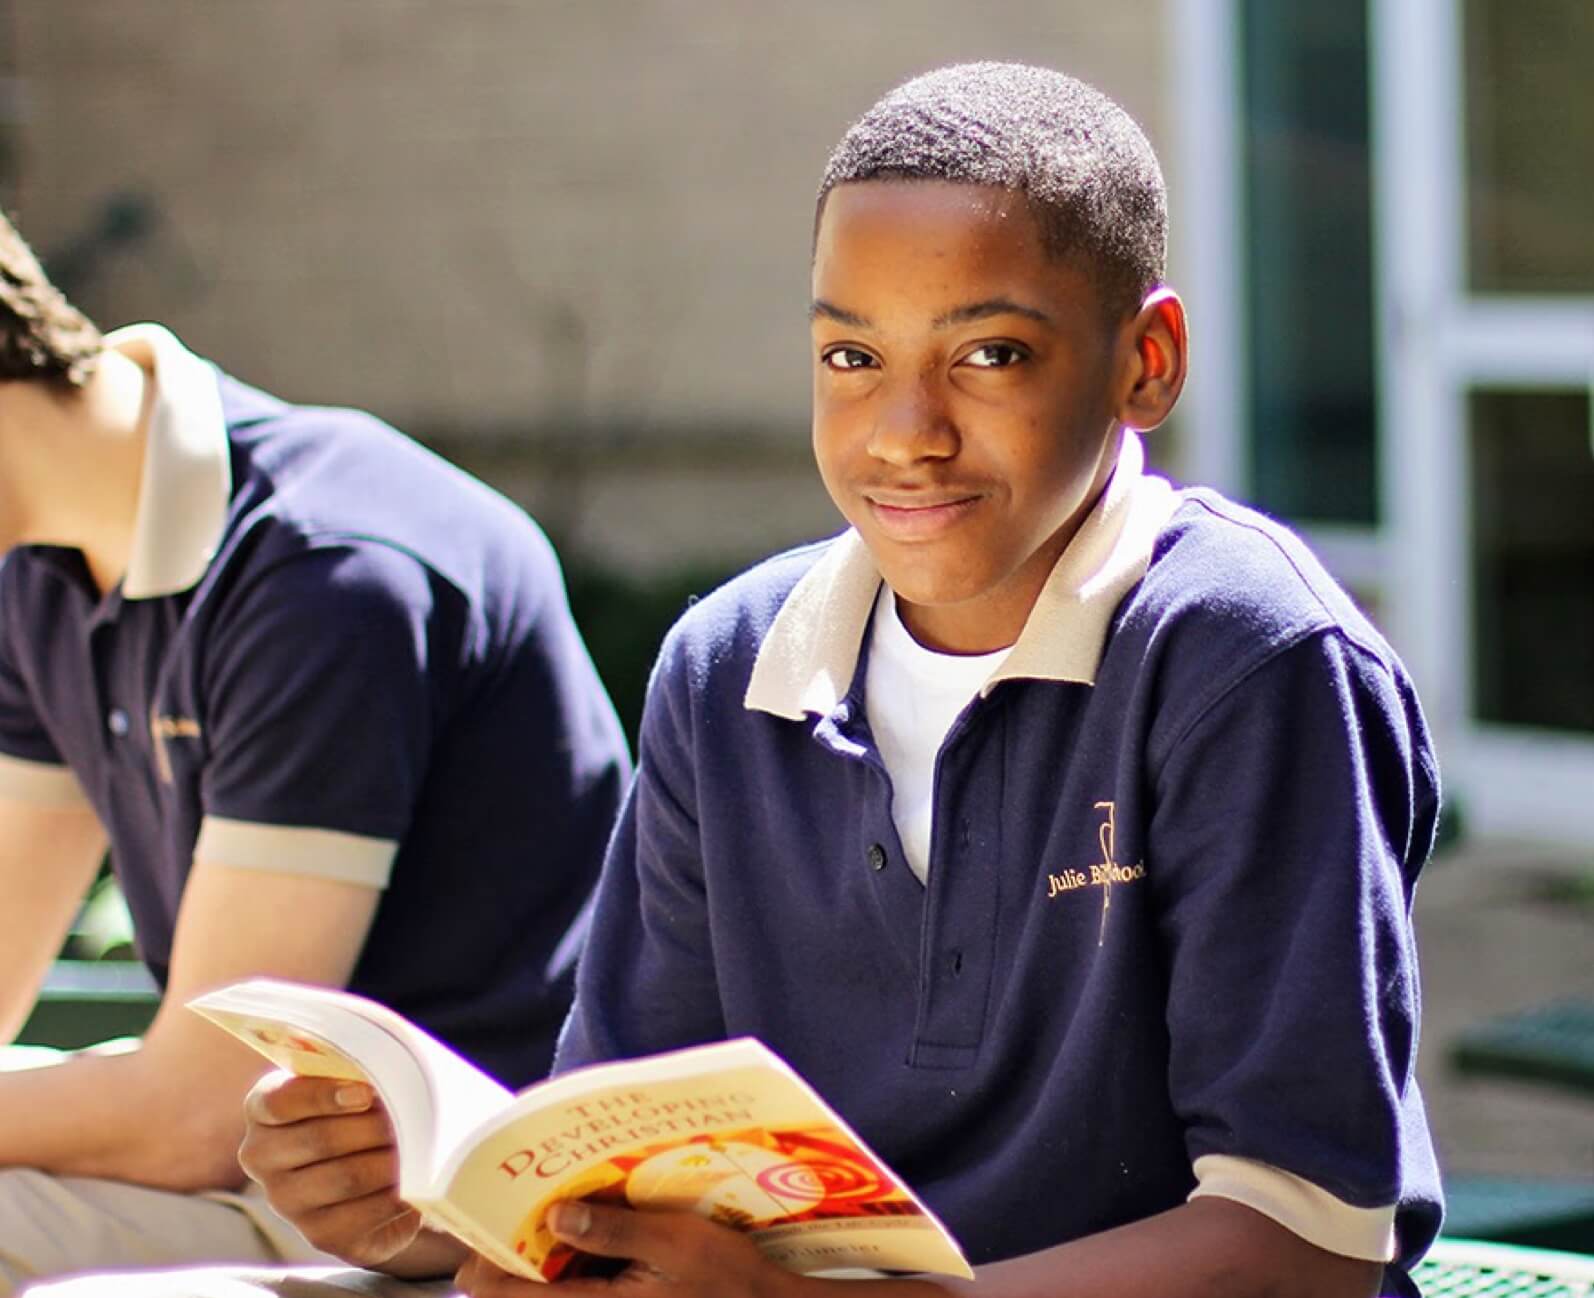 boy-smiling-holding-book